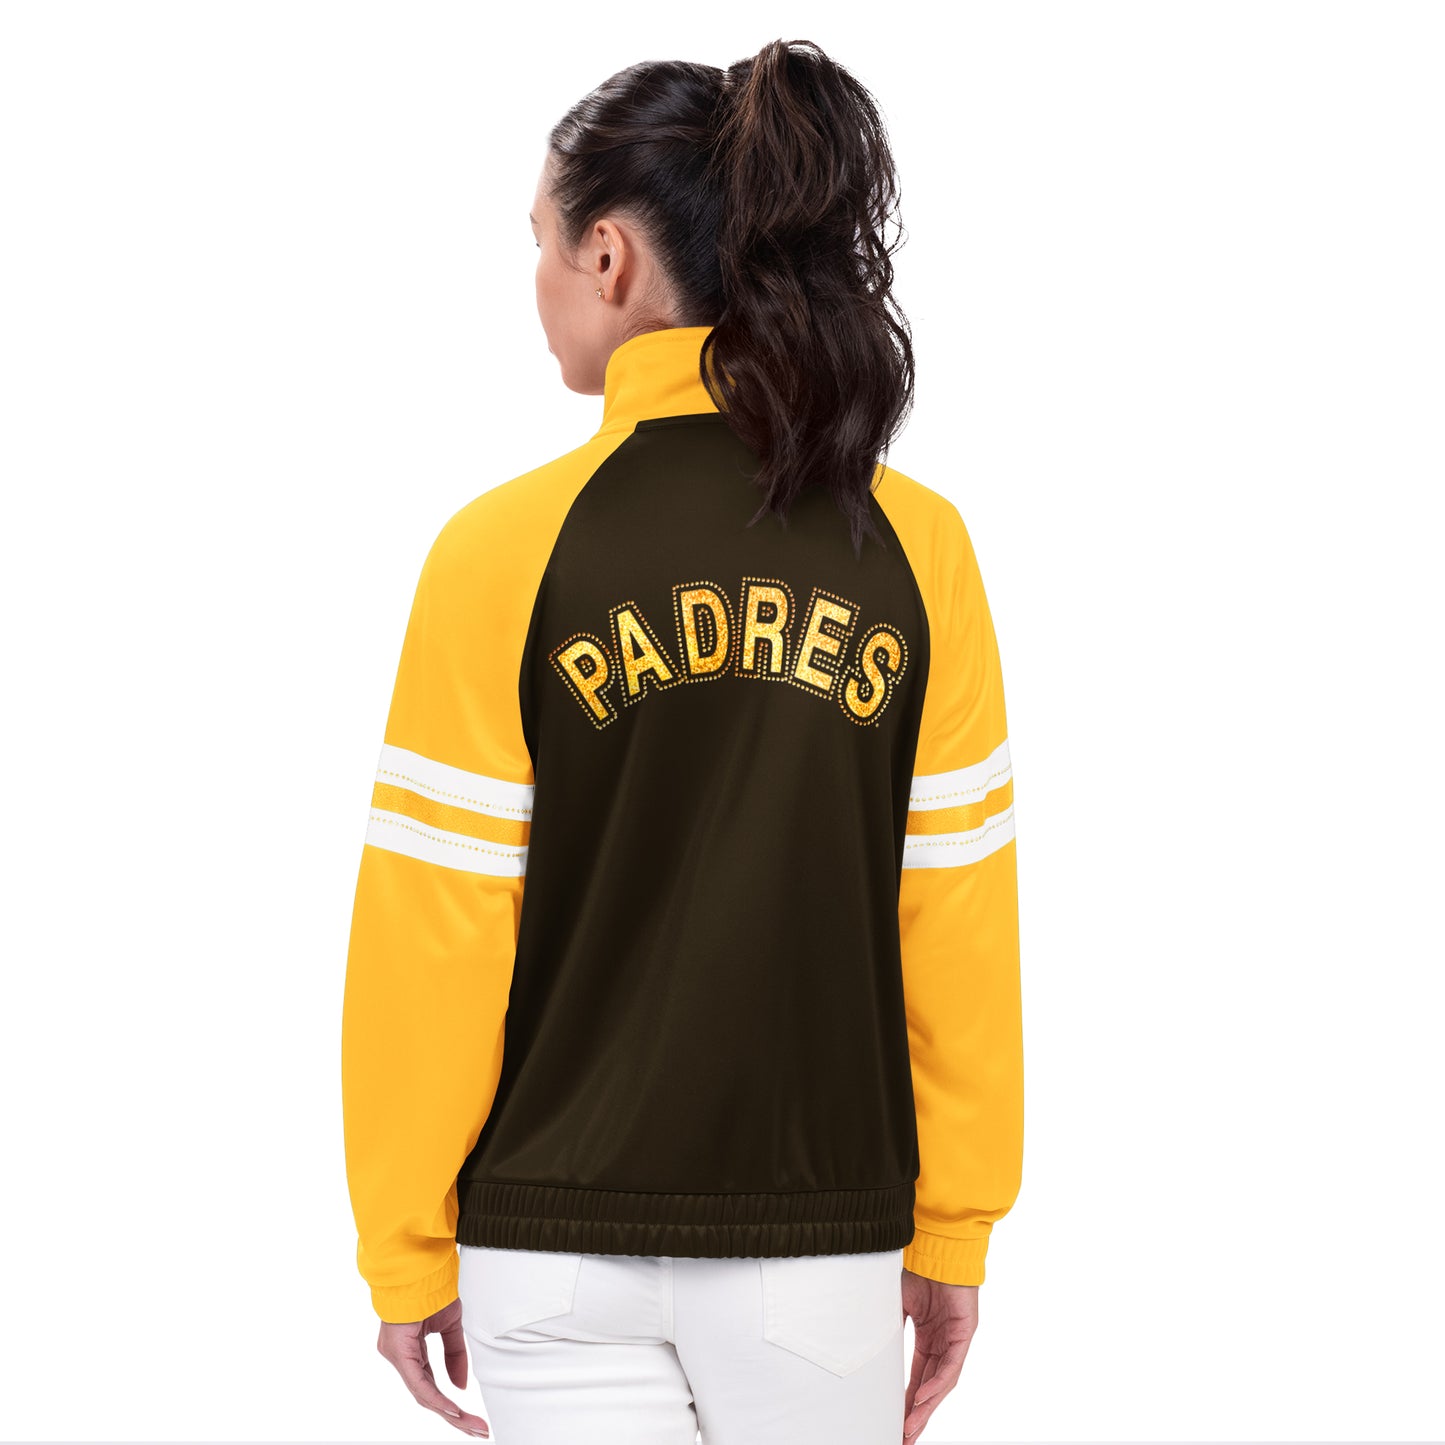 SAN DIEGO PADRES WOMEN'S MAIN PLAYER TRACK JACKET